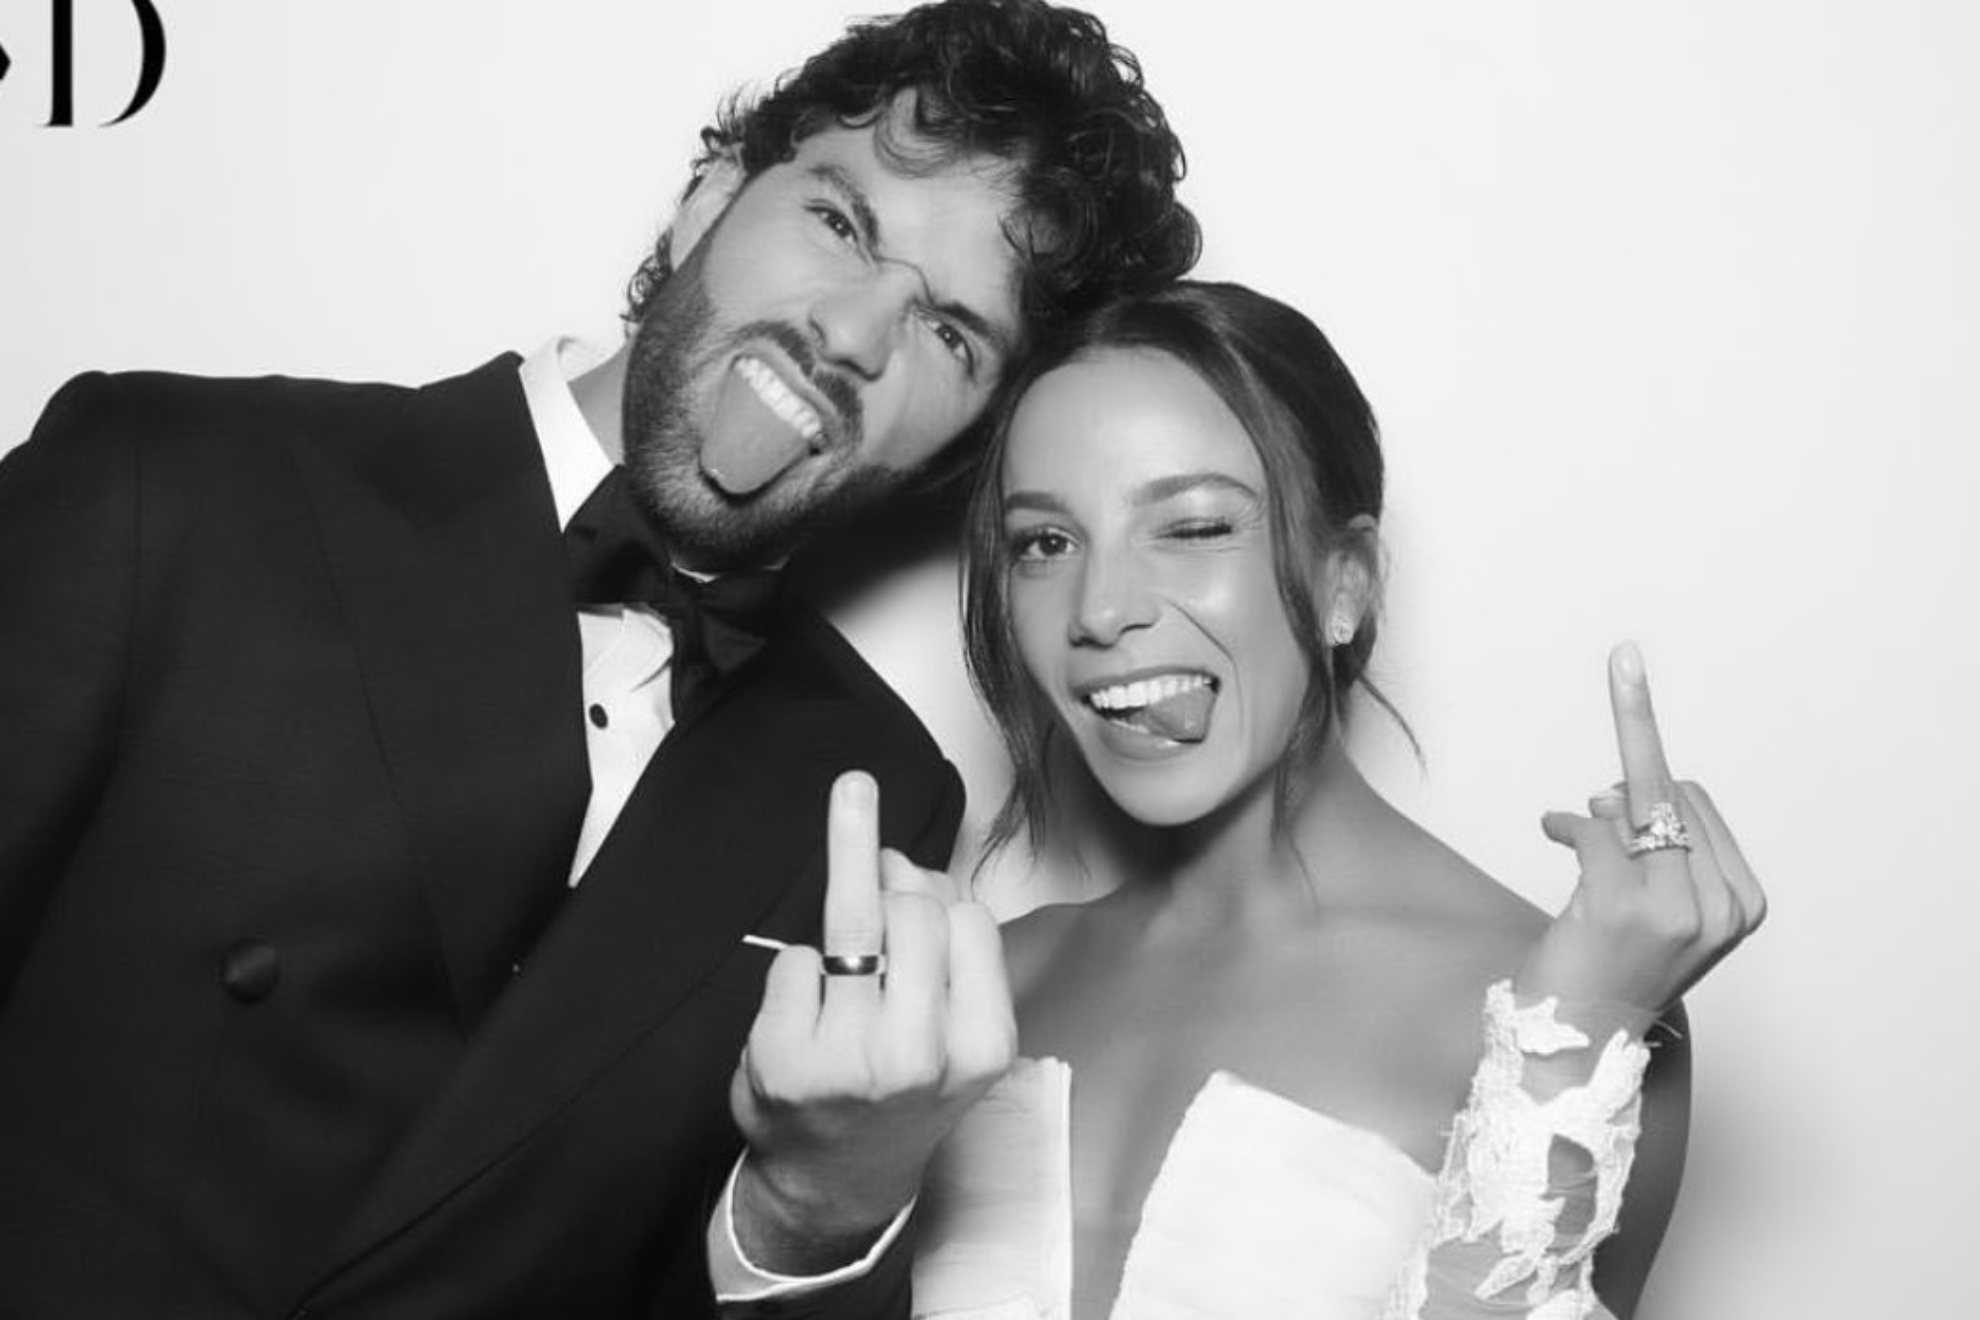 Dansby Swanson and Mallory Pugh